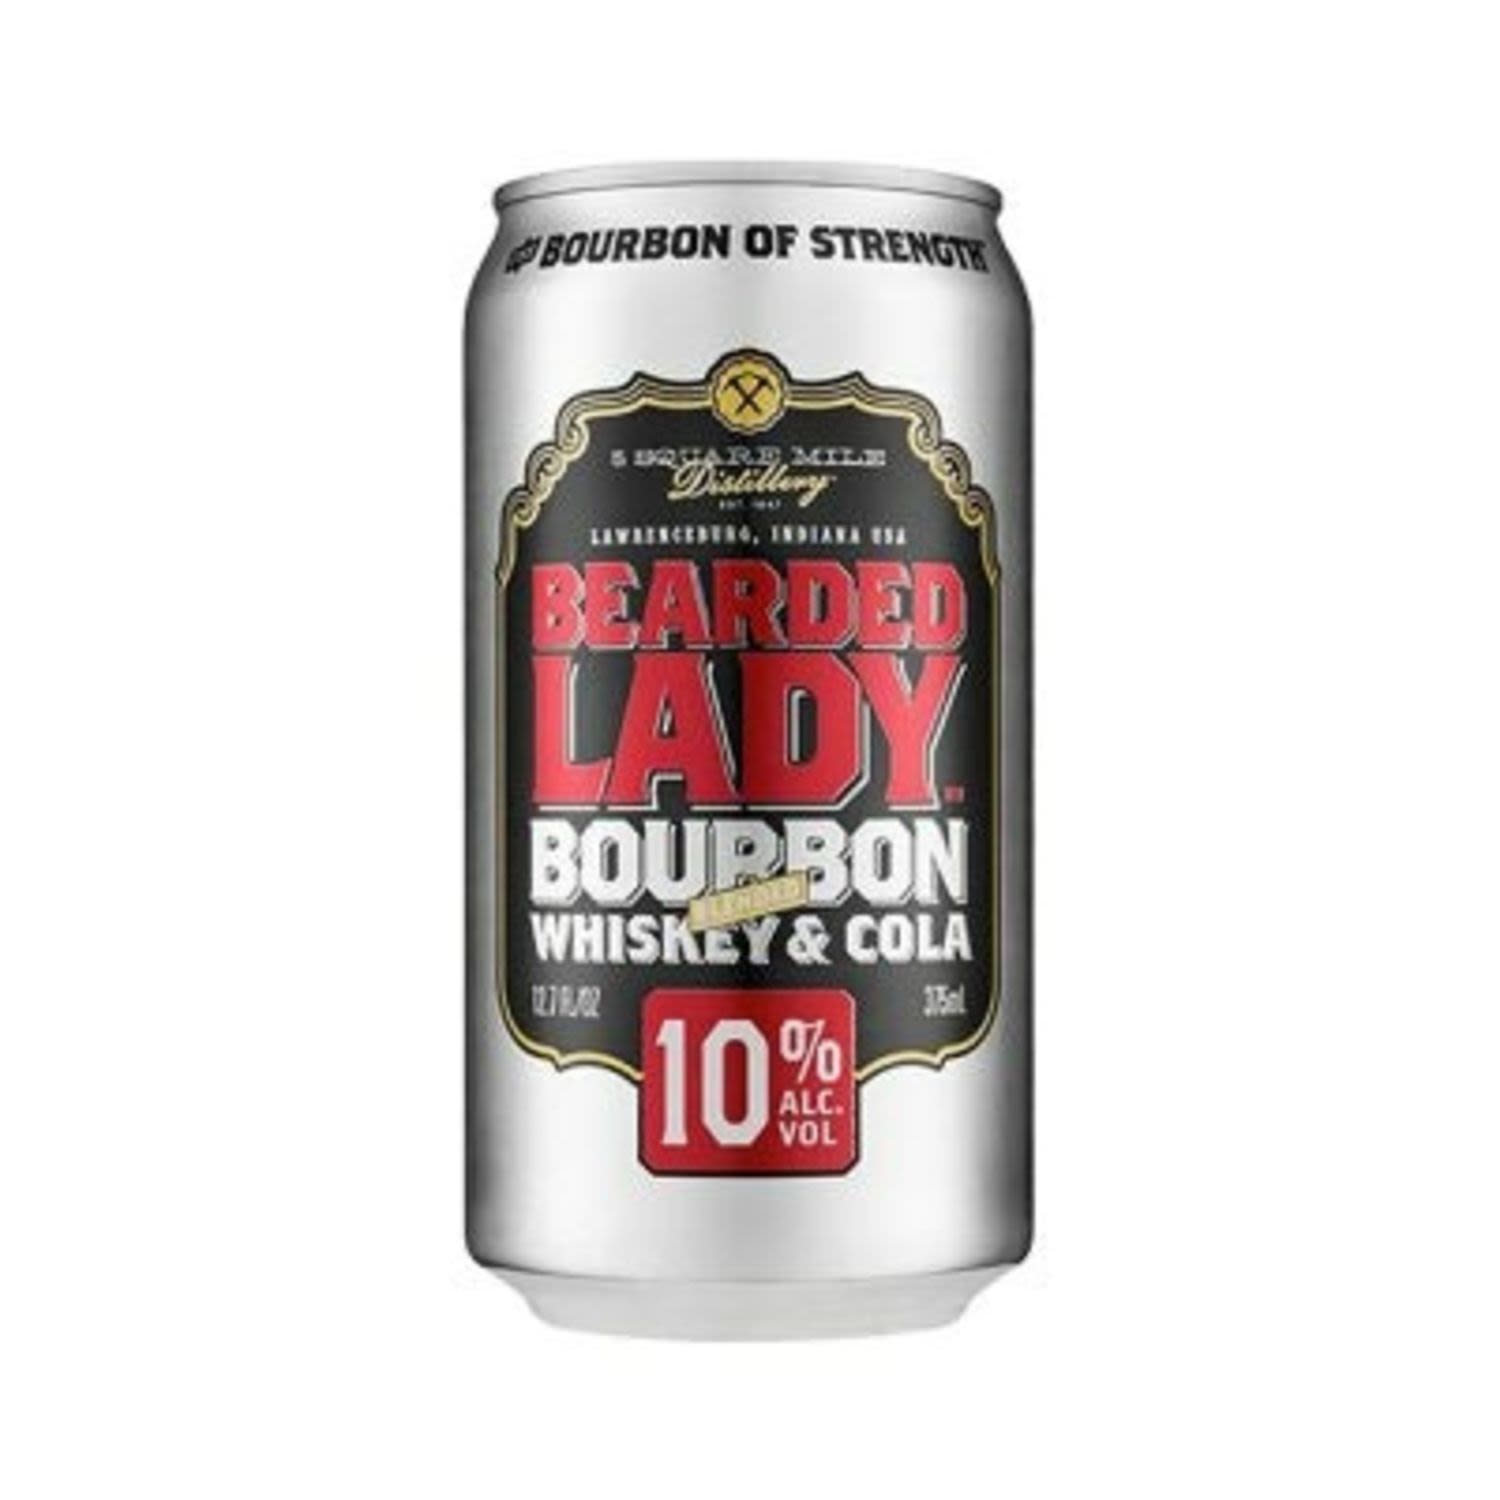 Bearded Lady Bourbon & Cola 10% Can 375mL 4 Pack